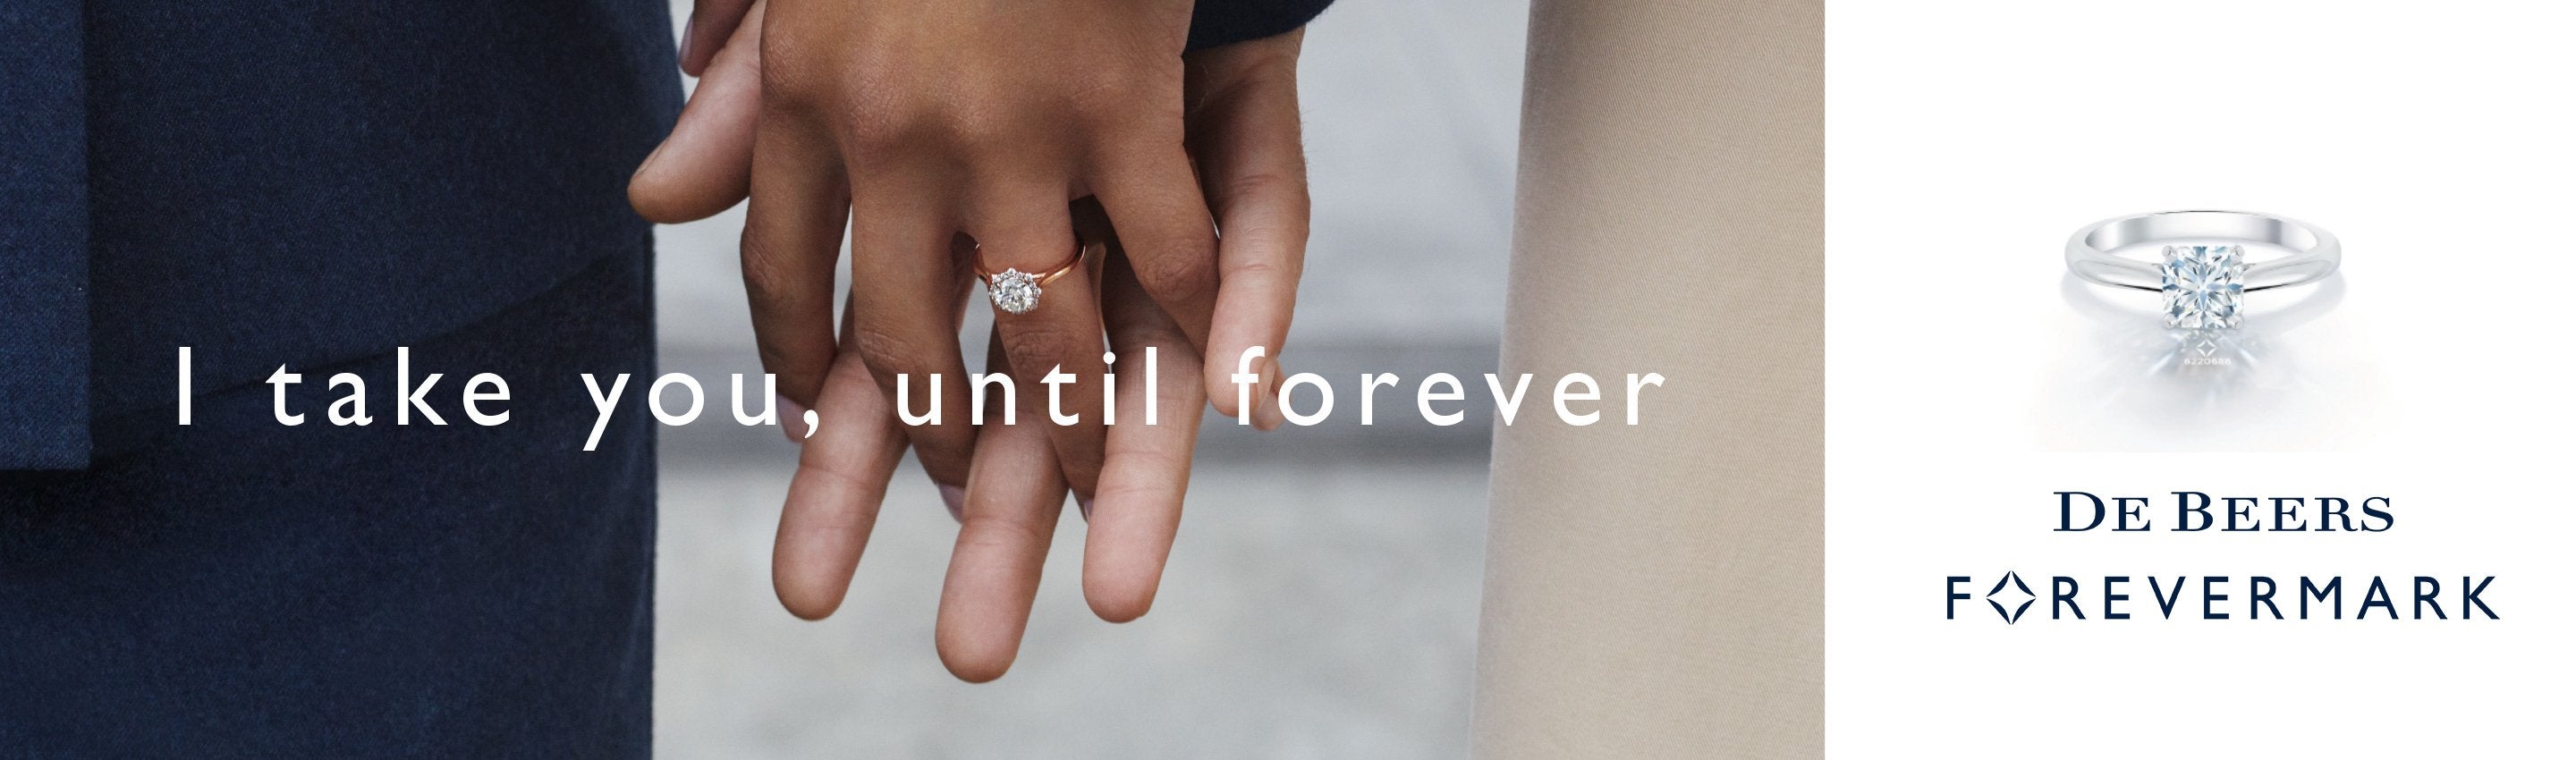 De Beers Set to Reboot 'A Diamond is Forever' for Forevermark Brand